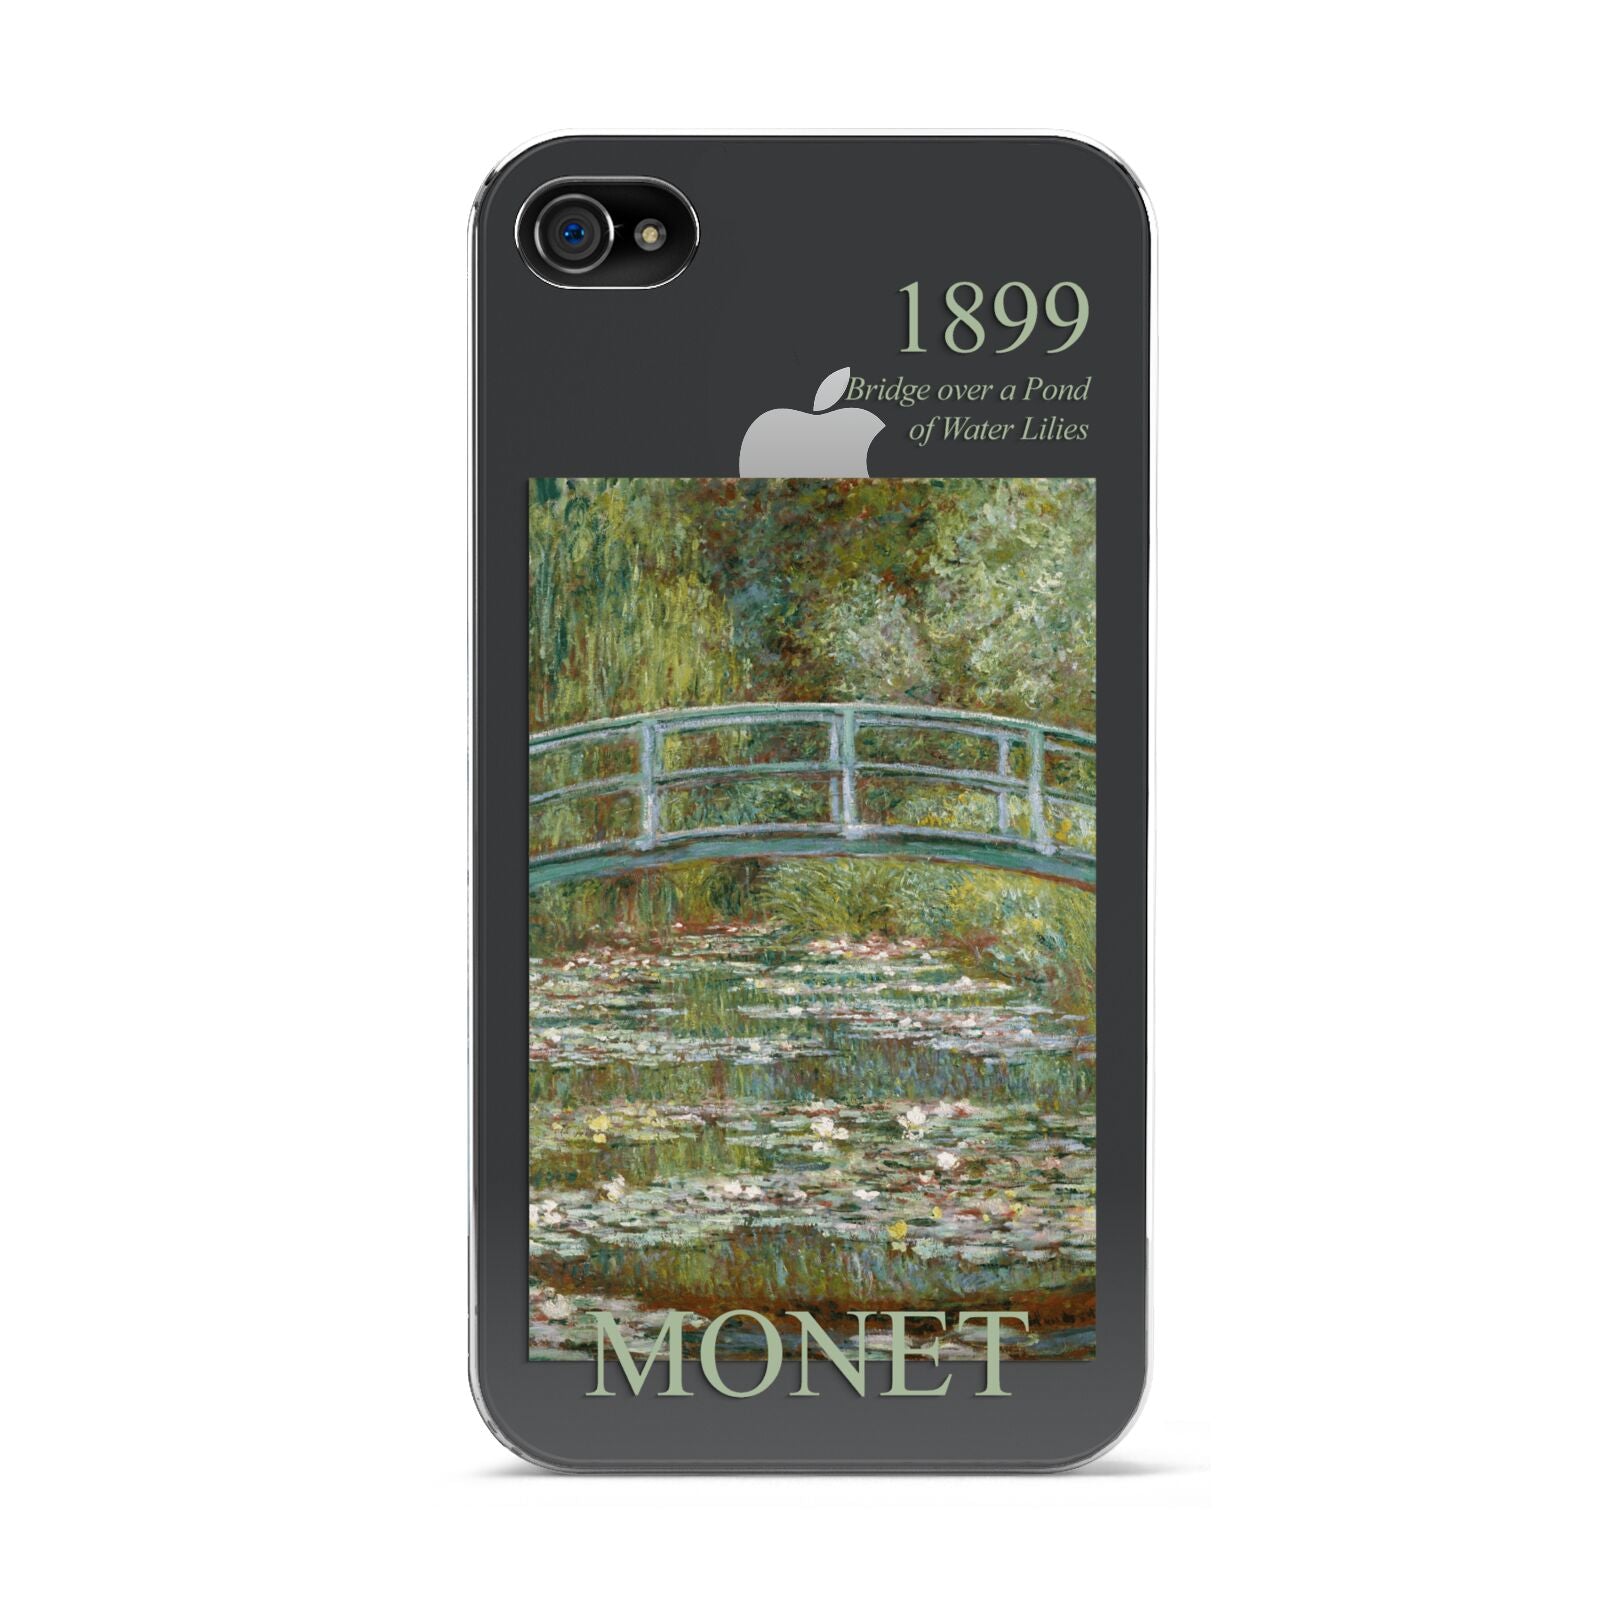 Bridge Over A Pond Of Water Lilies By Monet Apple iPhone 4s Case